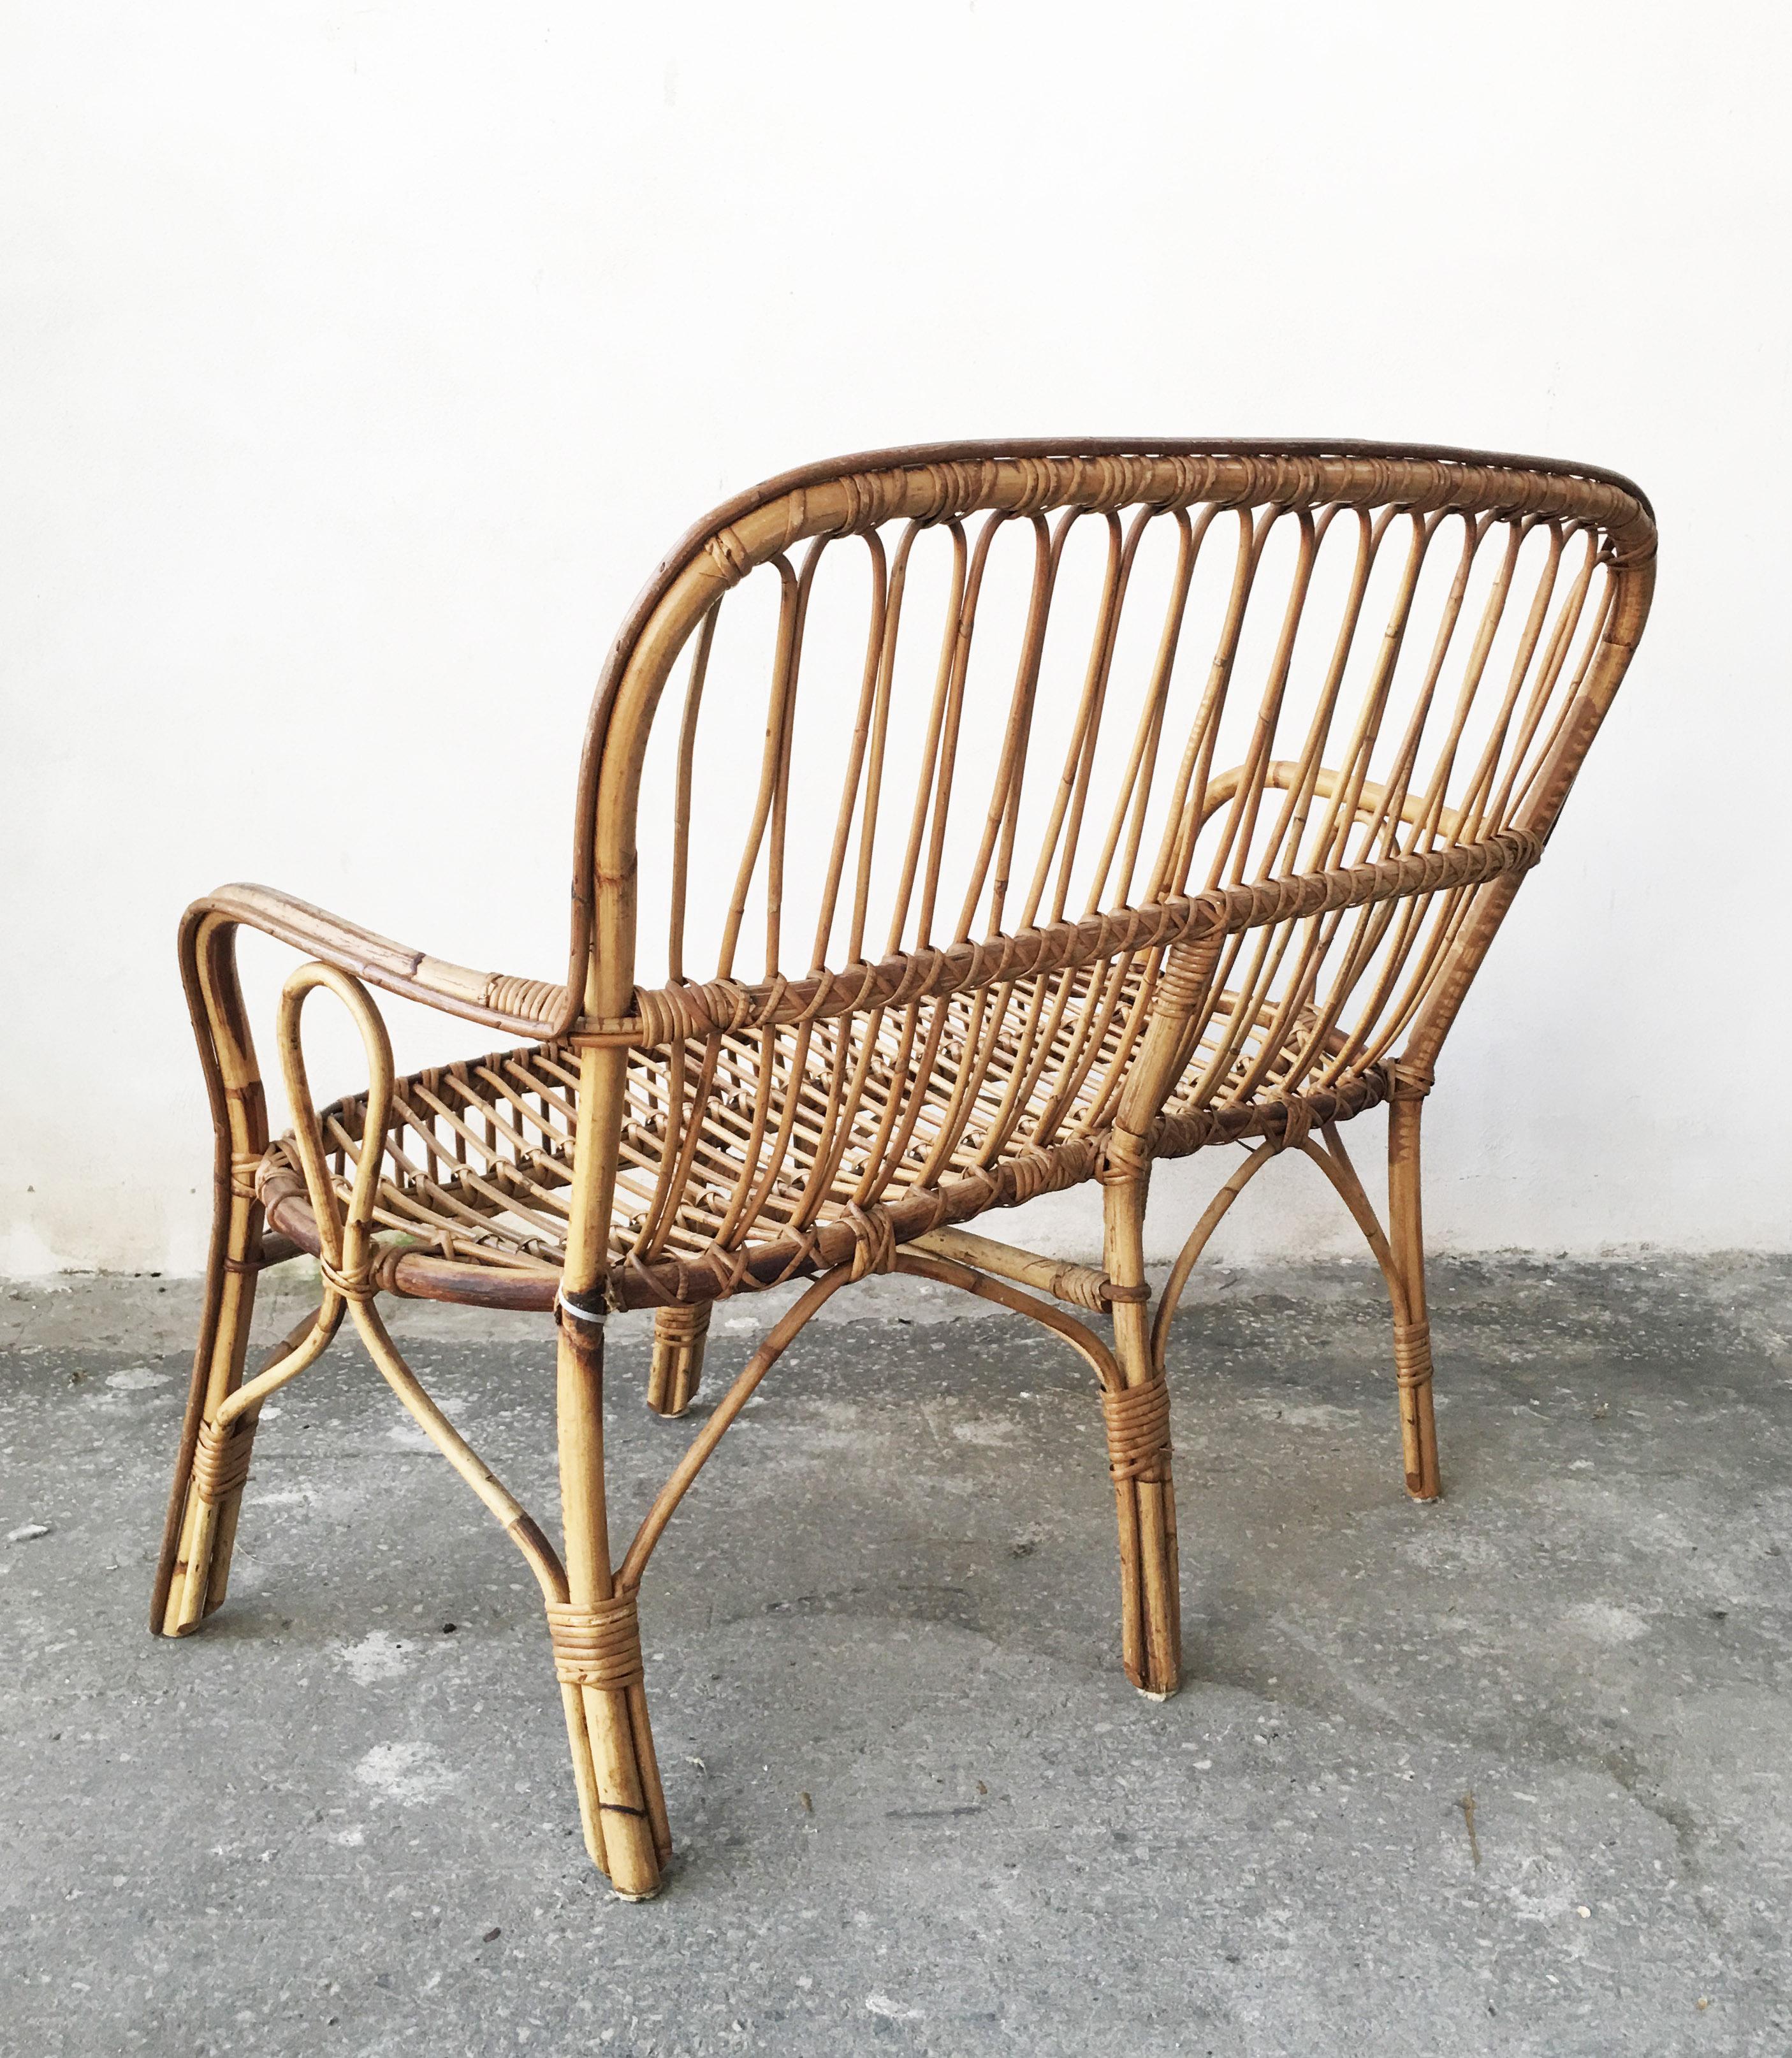 Mid-20th Century Italian Classic Sofa in Bamboo and Rattan with Curved Twine, Two-Seat, 1950s For Sale